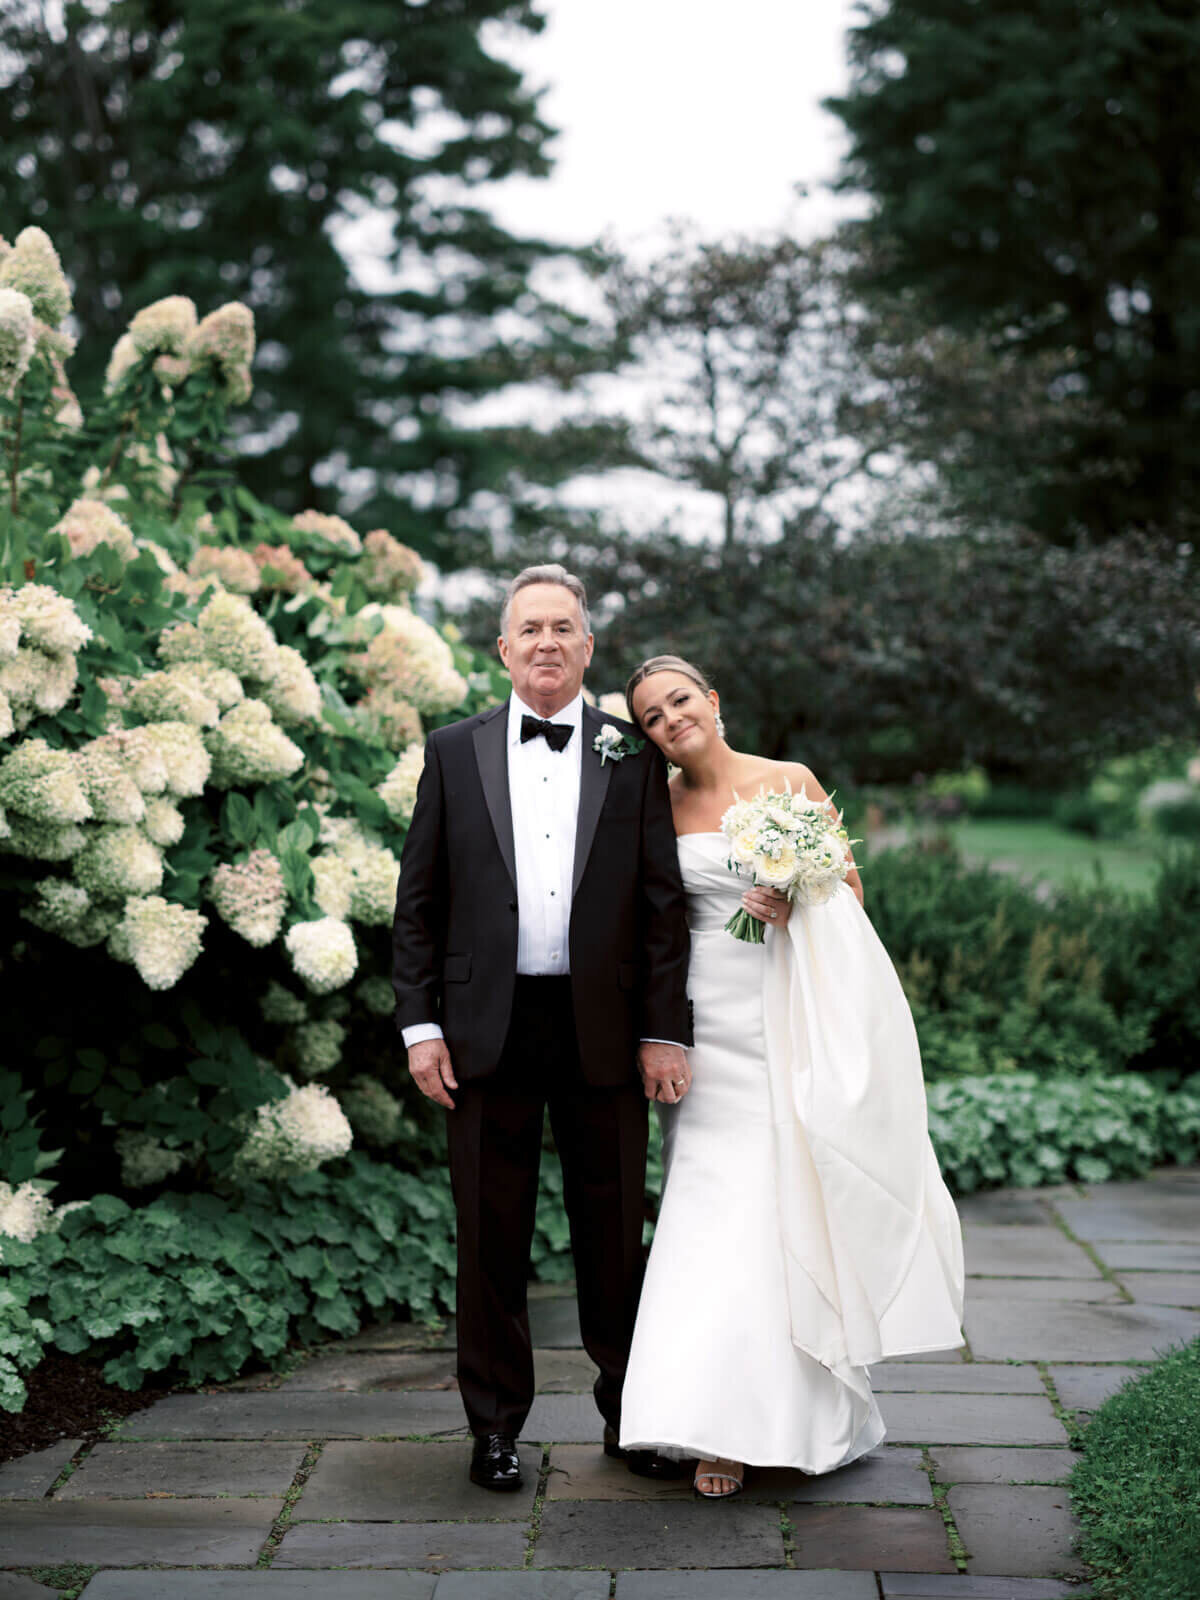 The happy bride and her father are standing on a walking path in a beautiful garden at The Lion Rock Farm, Sharon, CT. Image by Jenny Fu Studio